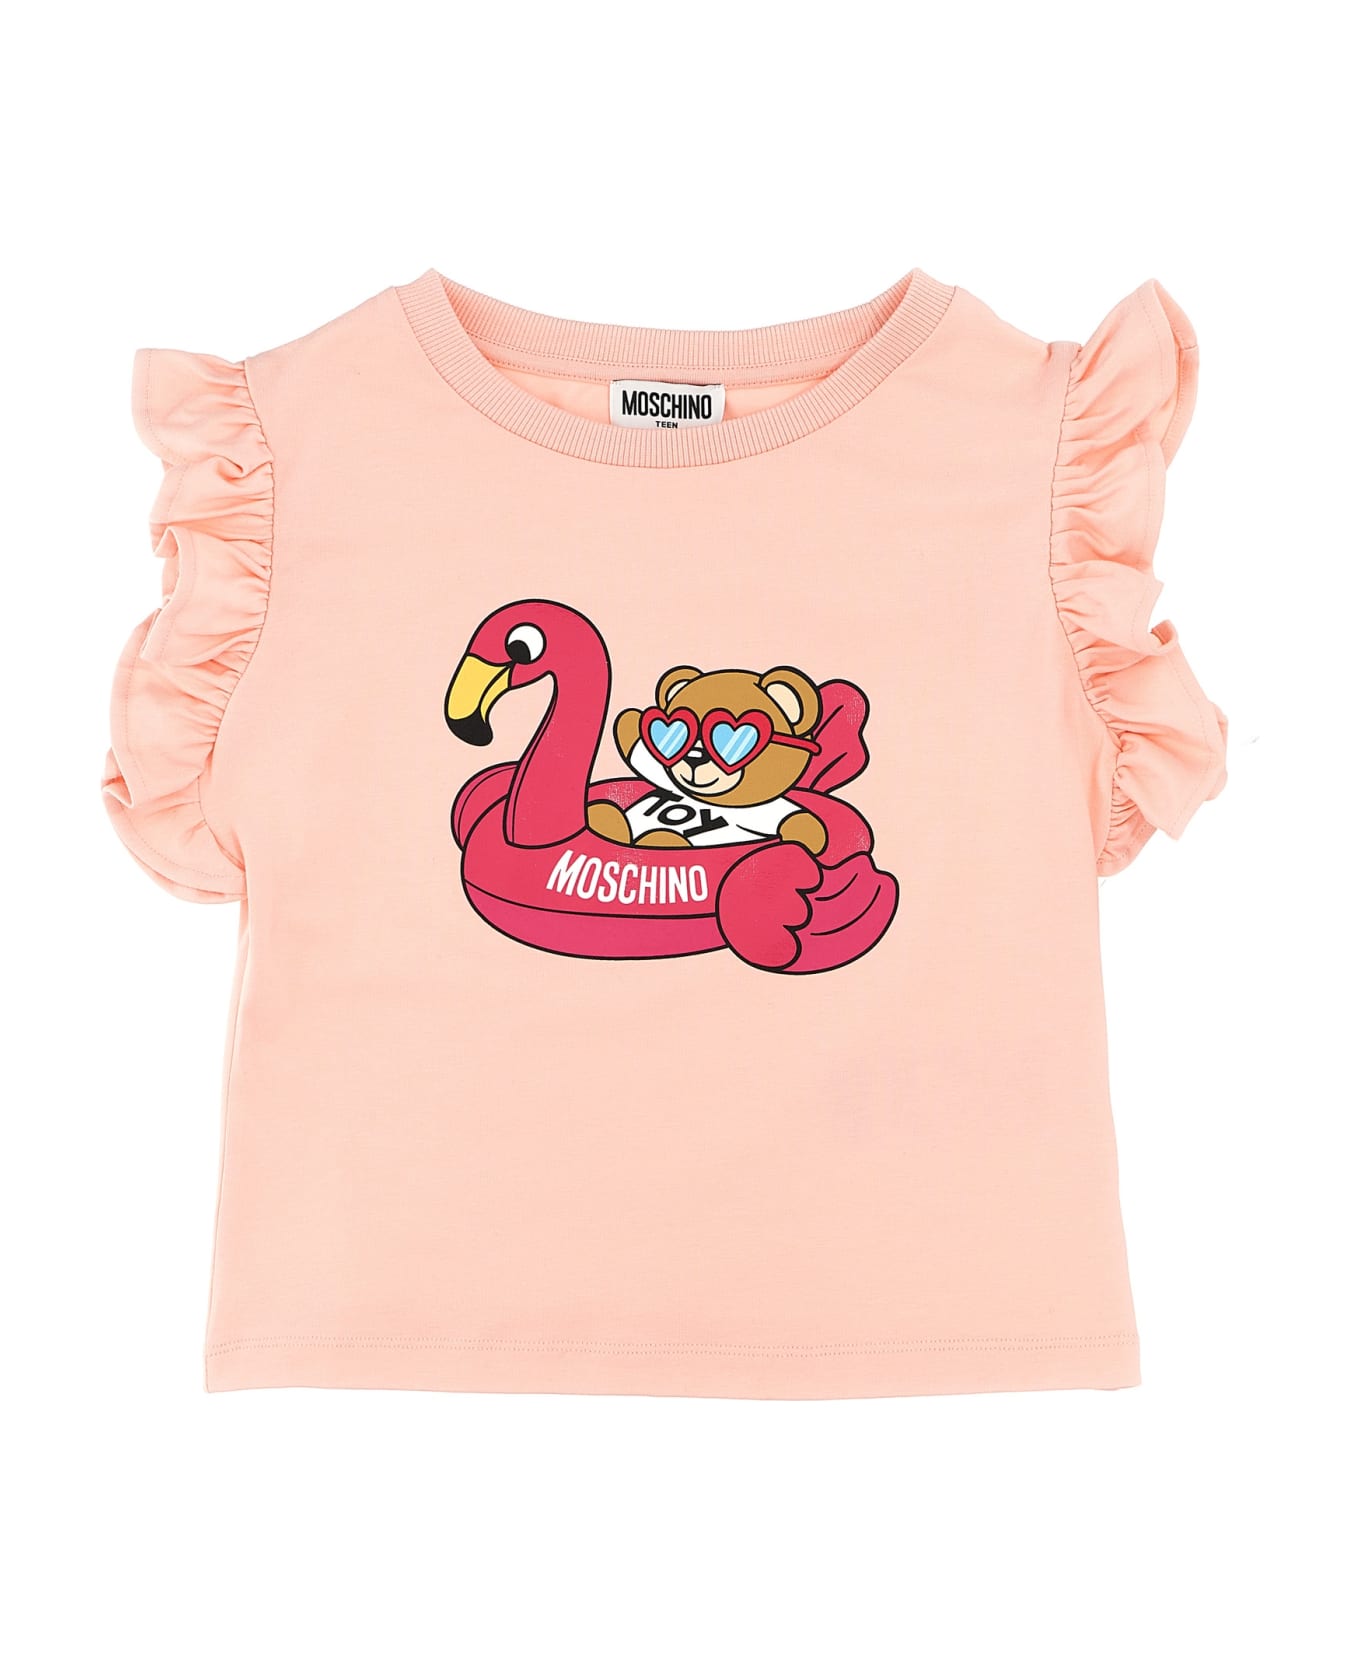 Moschino Printed T-shirt - Pink Tシャツ＆ポロシャツ